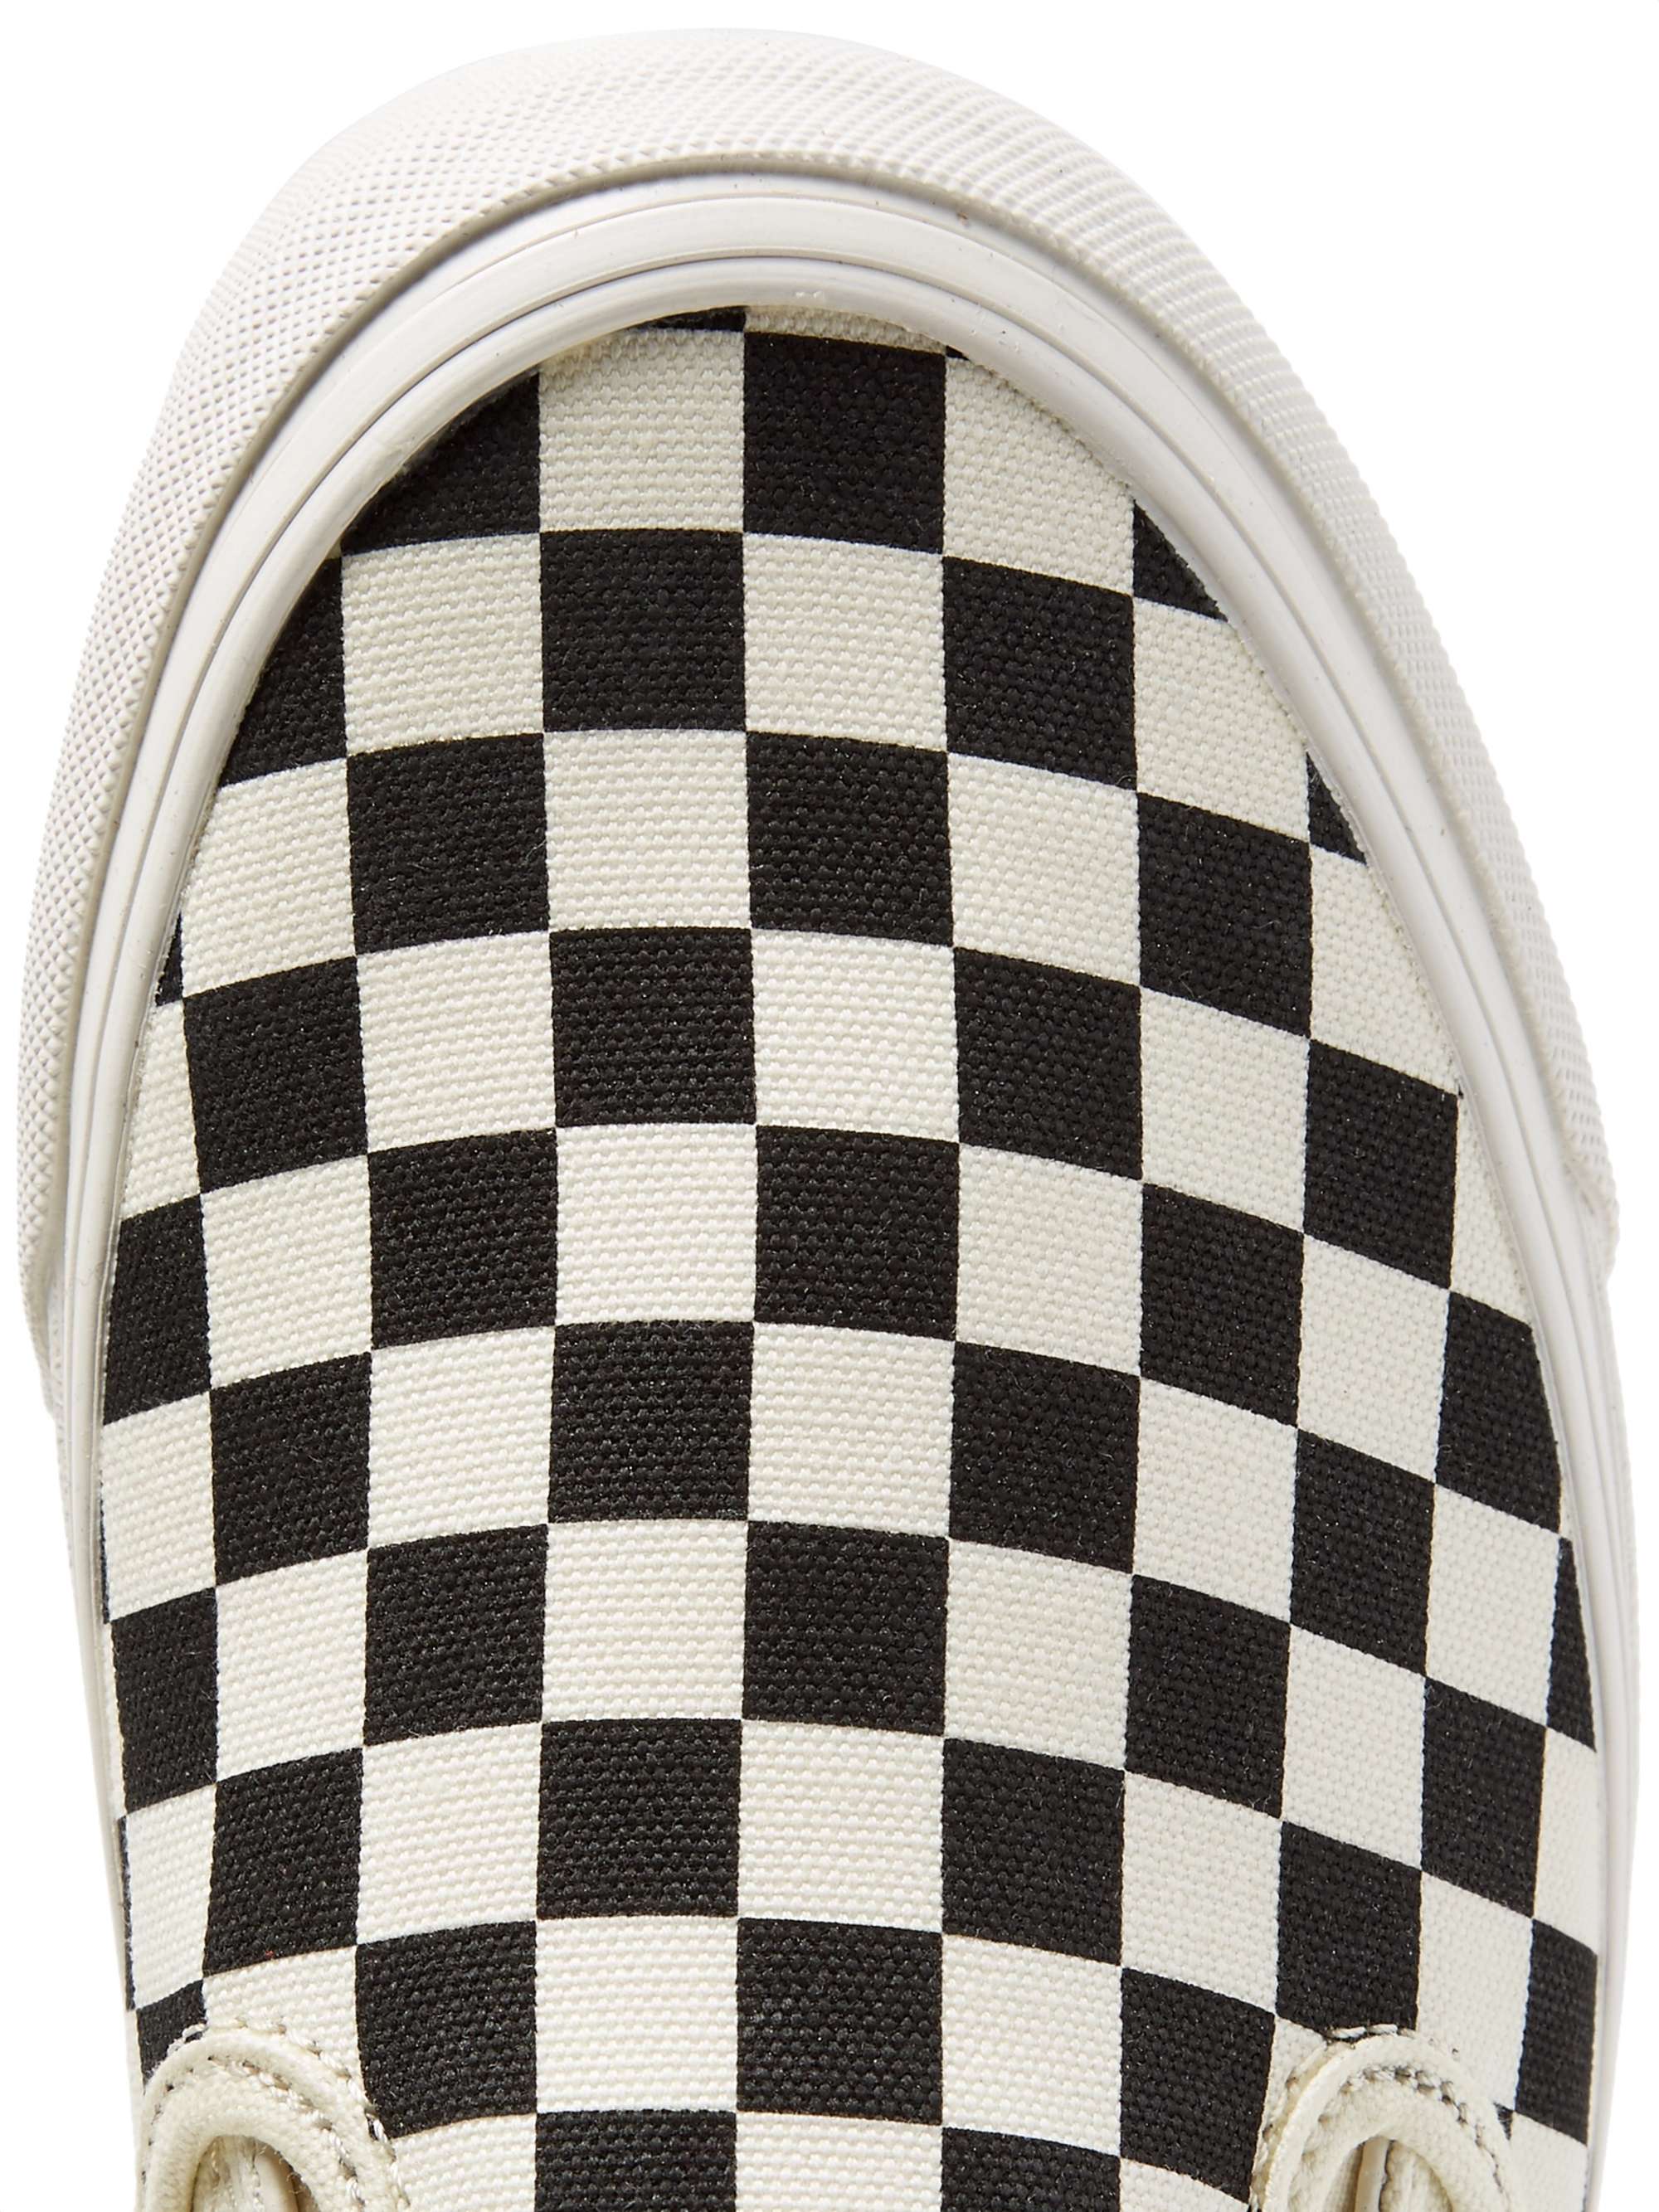 VANS OG Classic LX Checkerboard Canvas Slip-On Sneakers